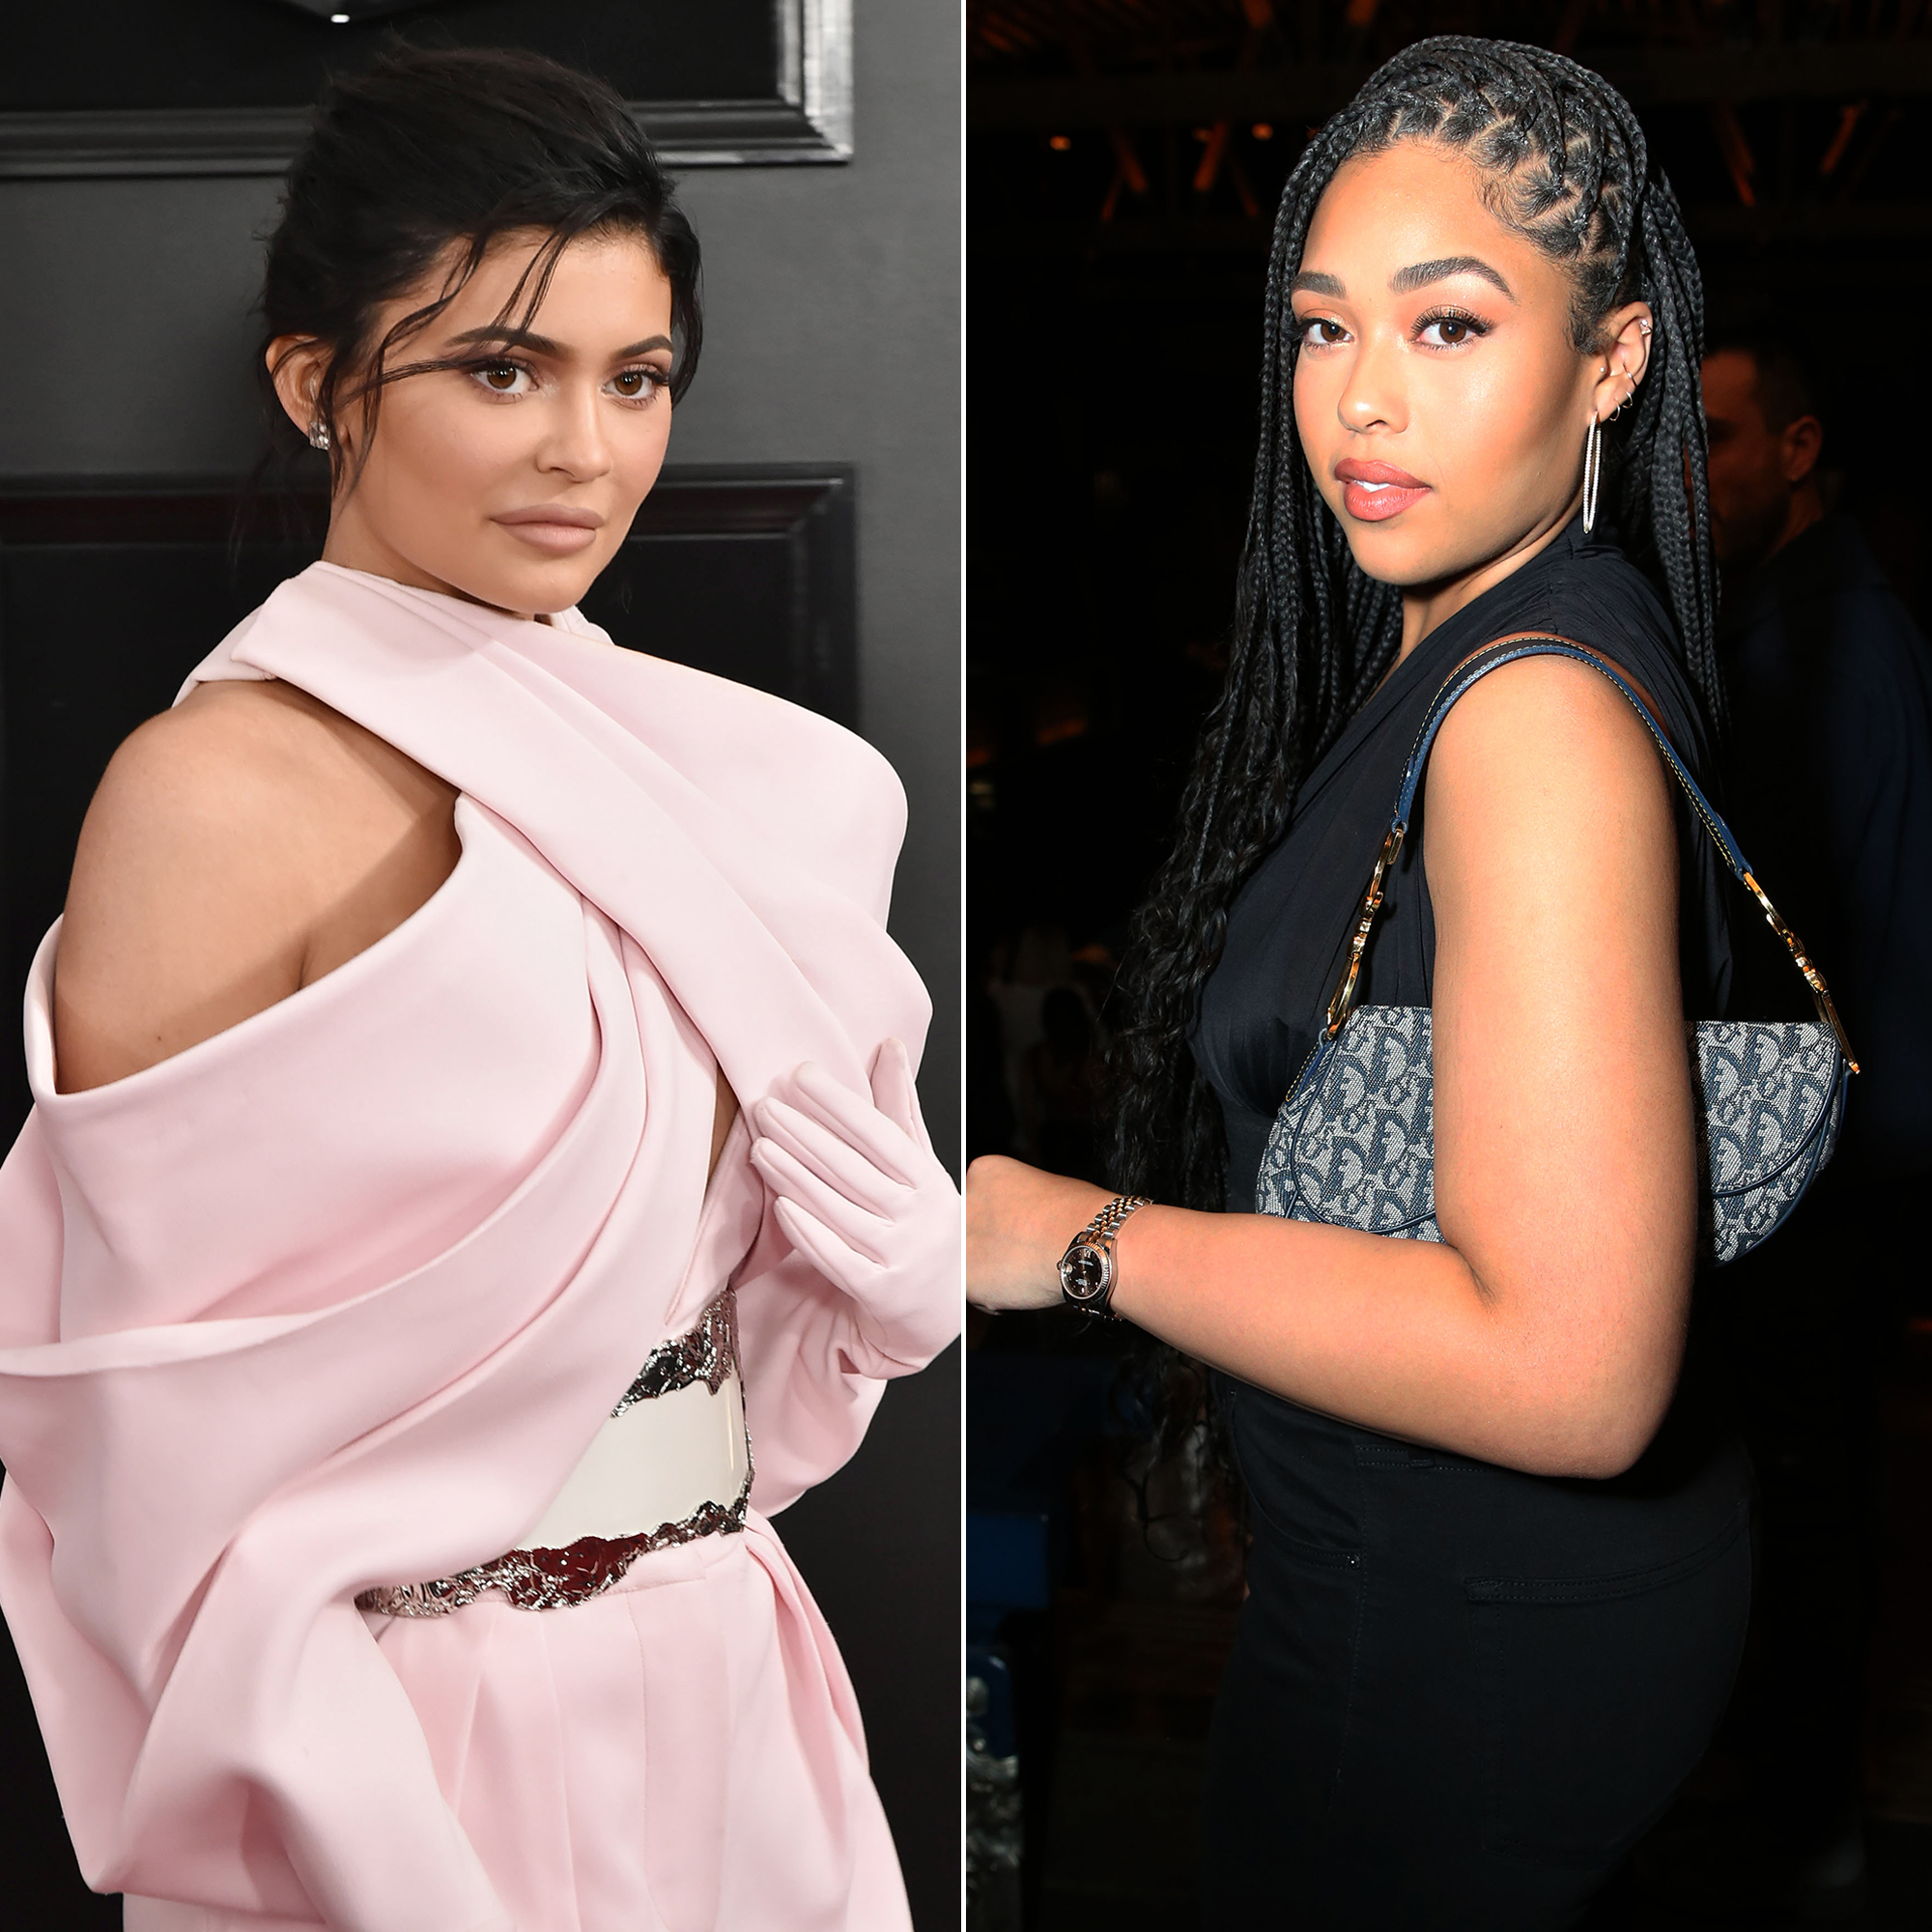 Kylie Jenner's ex-BFF Jordyn Woods sparks concern after she looks  unrecognizable in new photos following weight loss